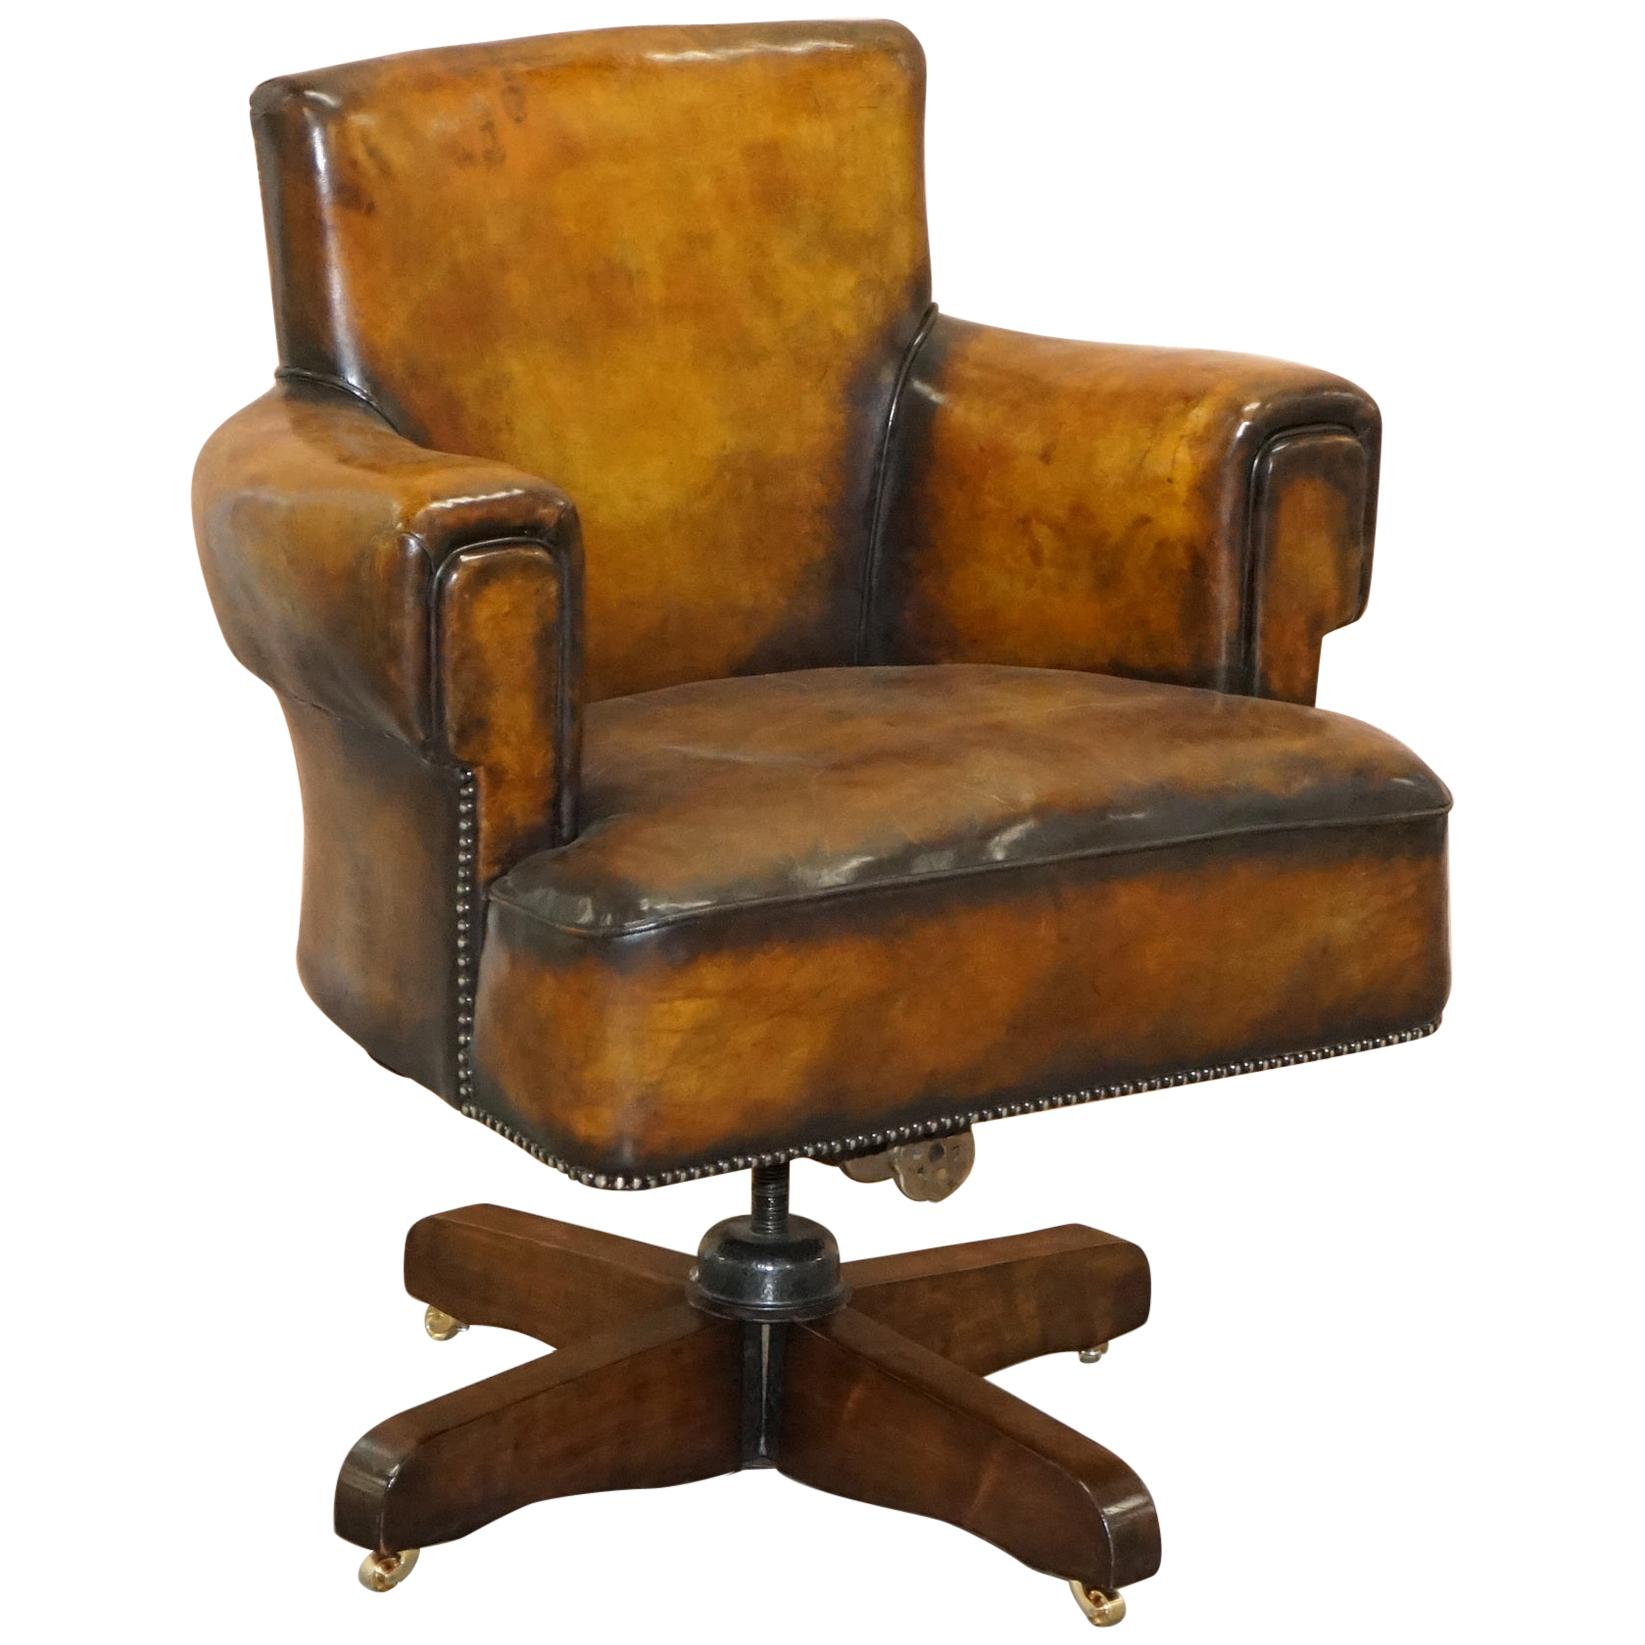 Rare Restored Art Deco Hillcrest 1920 Brown Leather Captains Swivel Office Chair